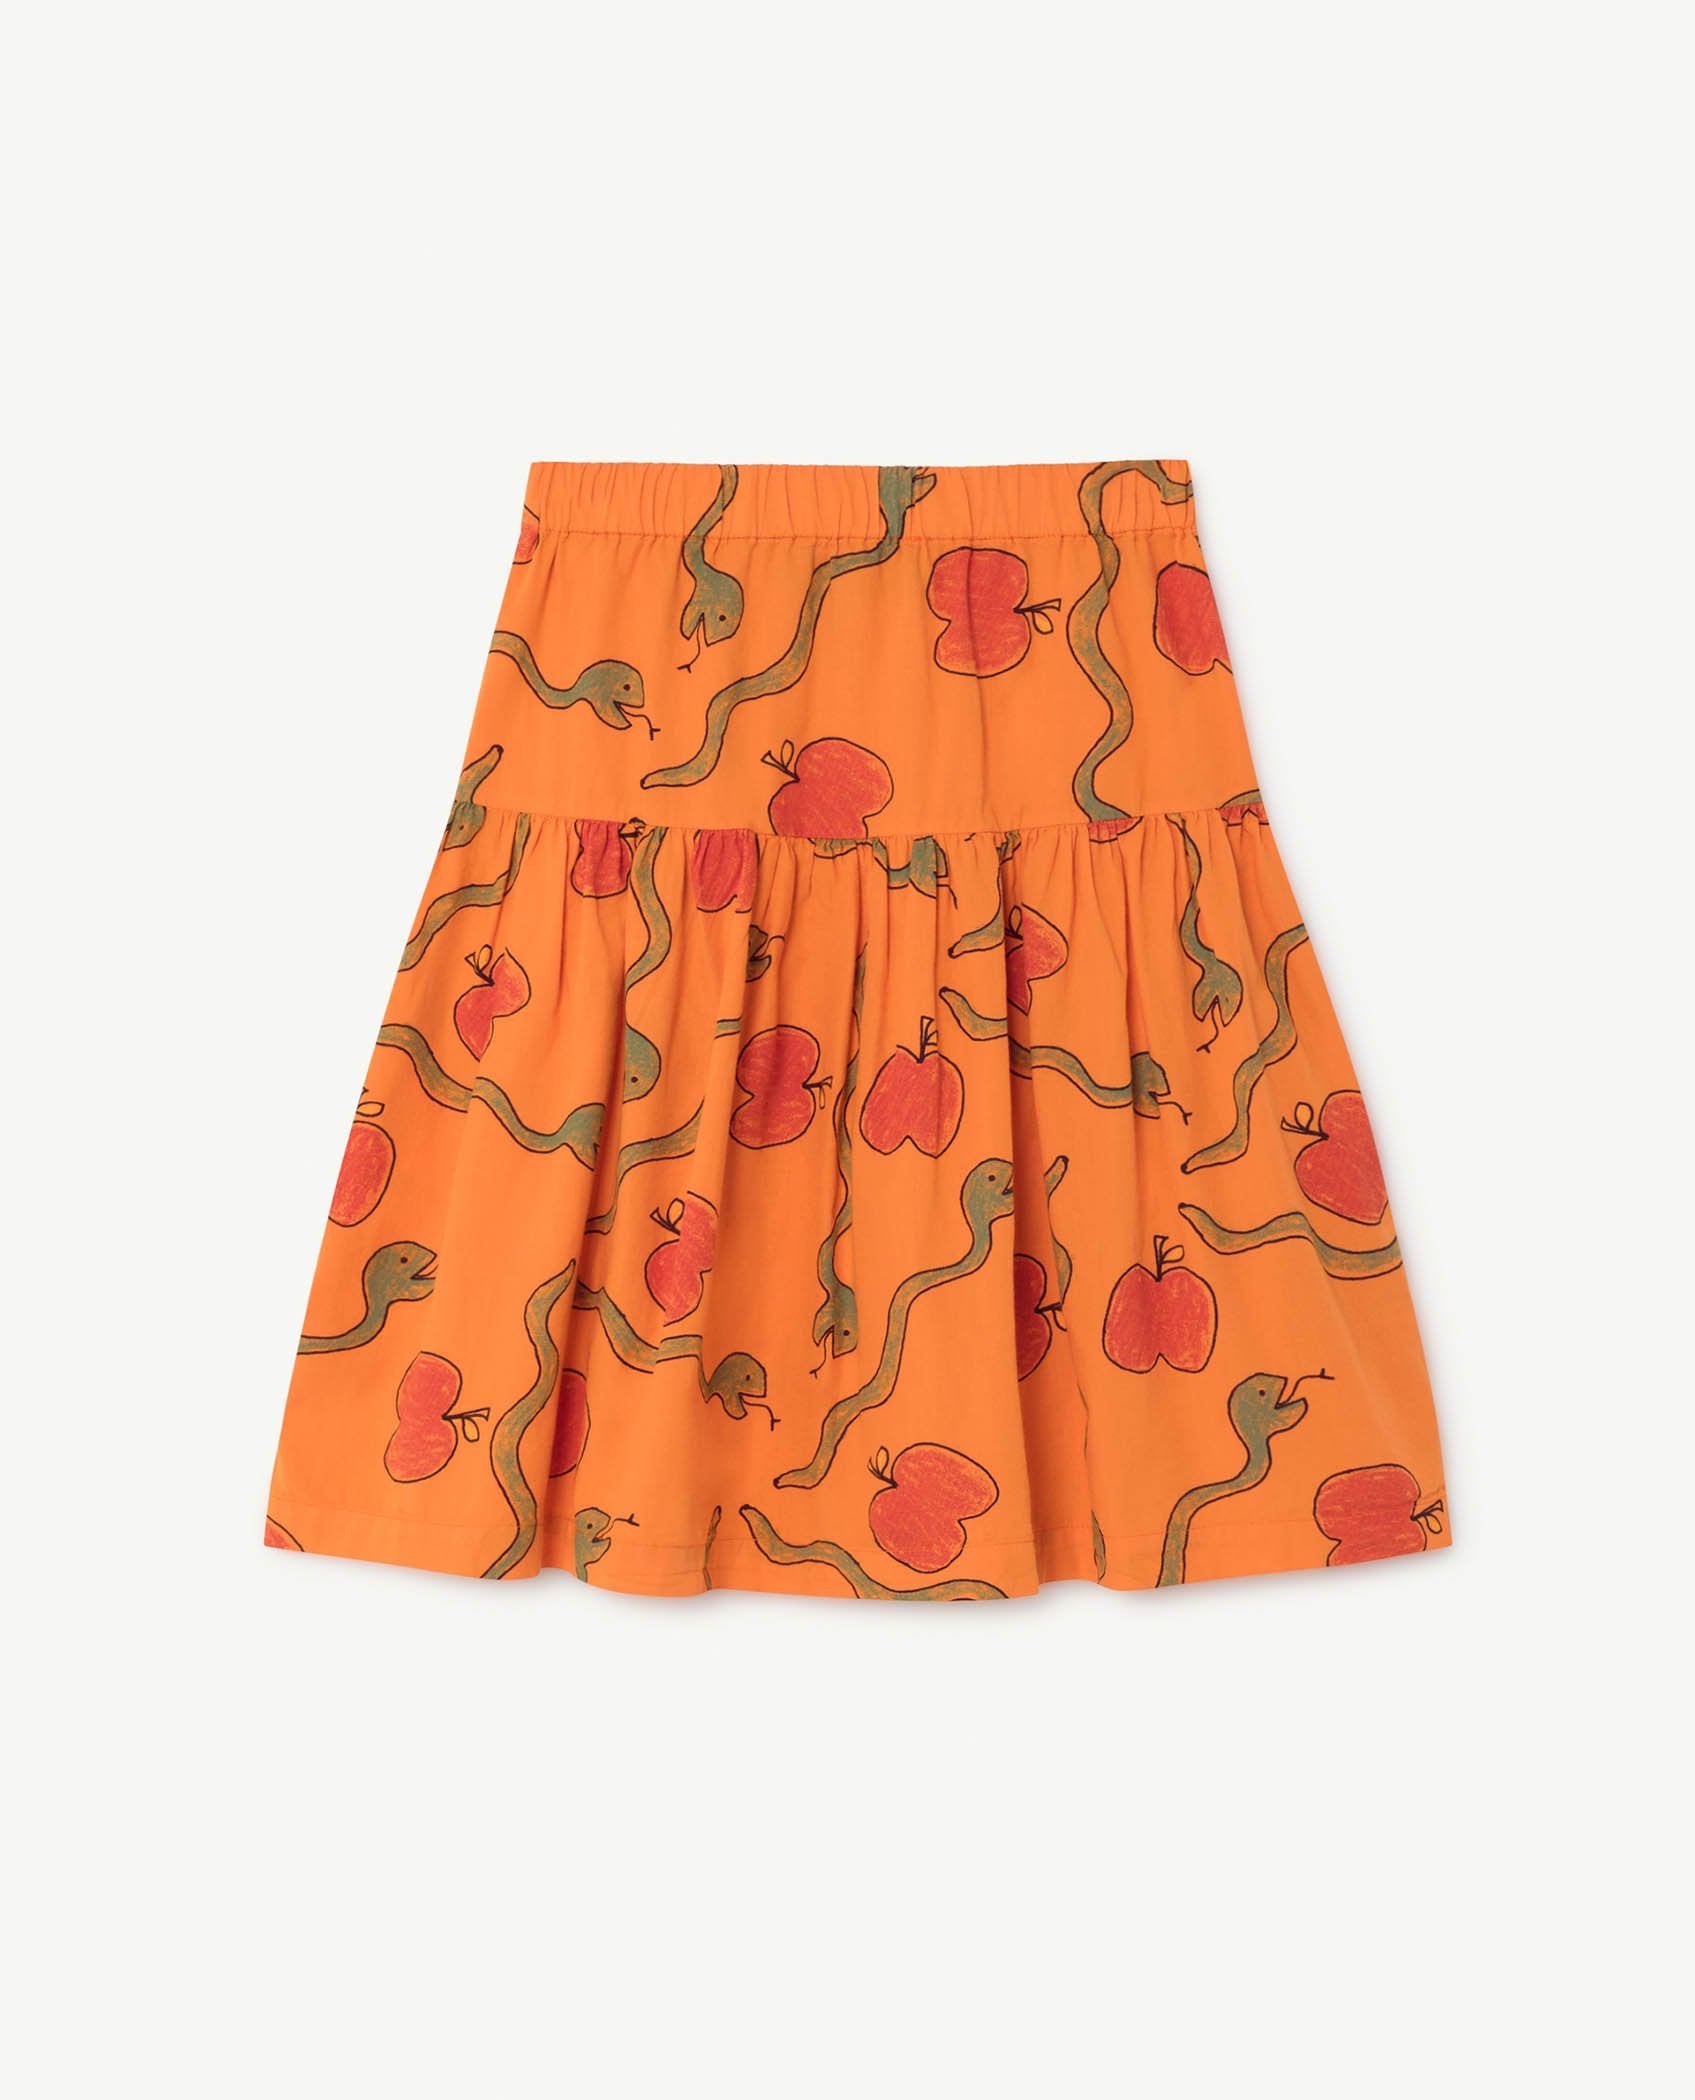 Apples and Snakes Turkey Skirt PRODUCT BACK